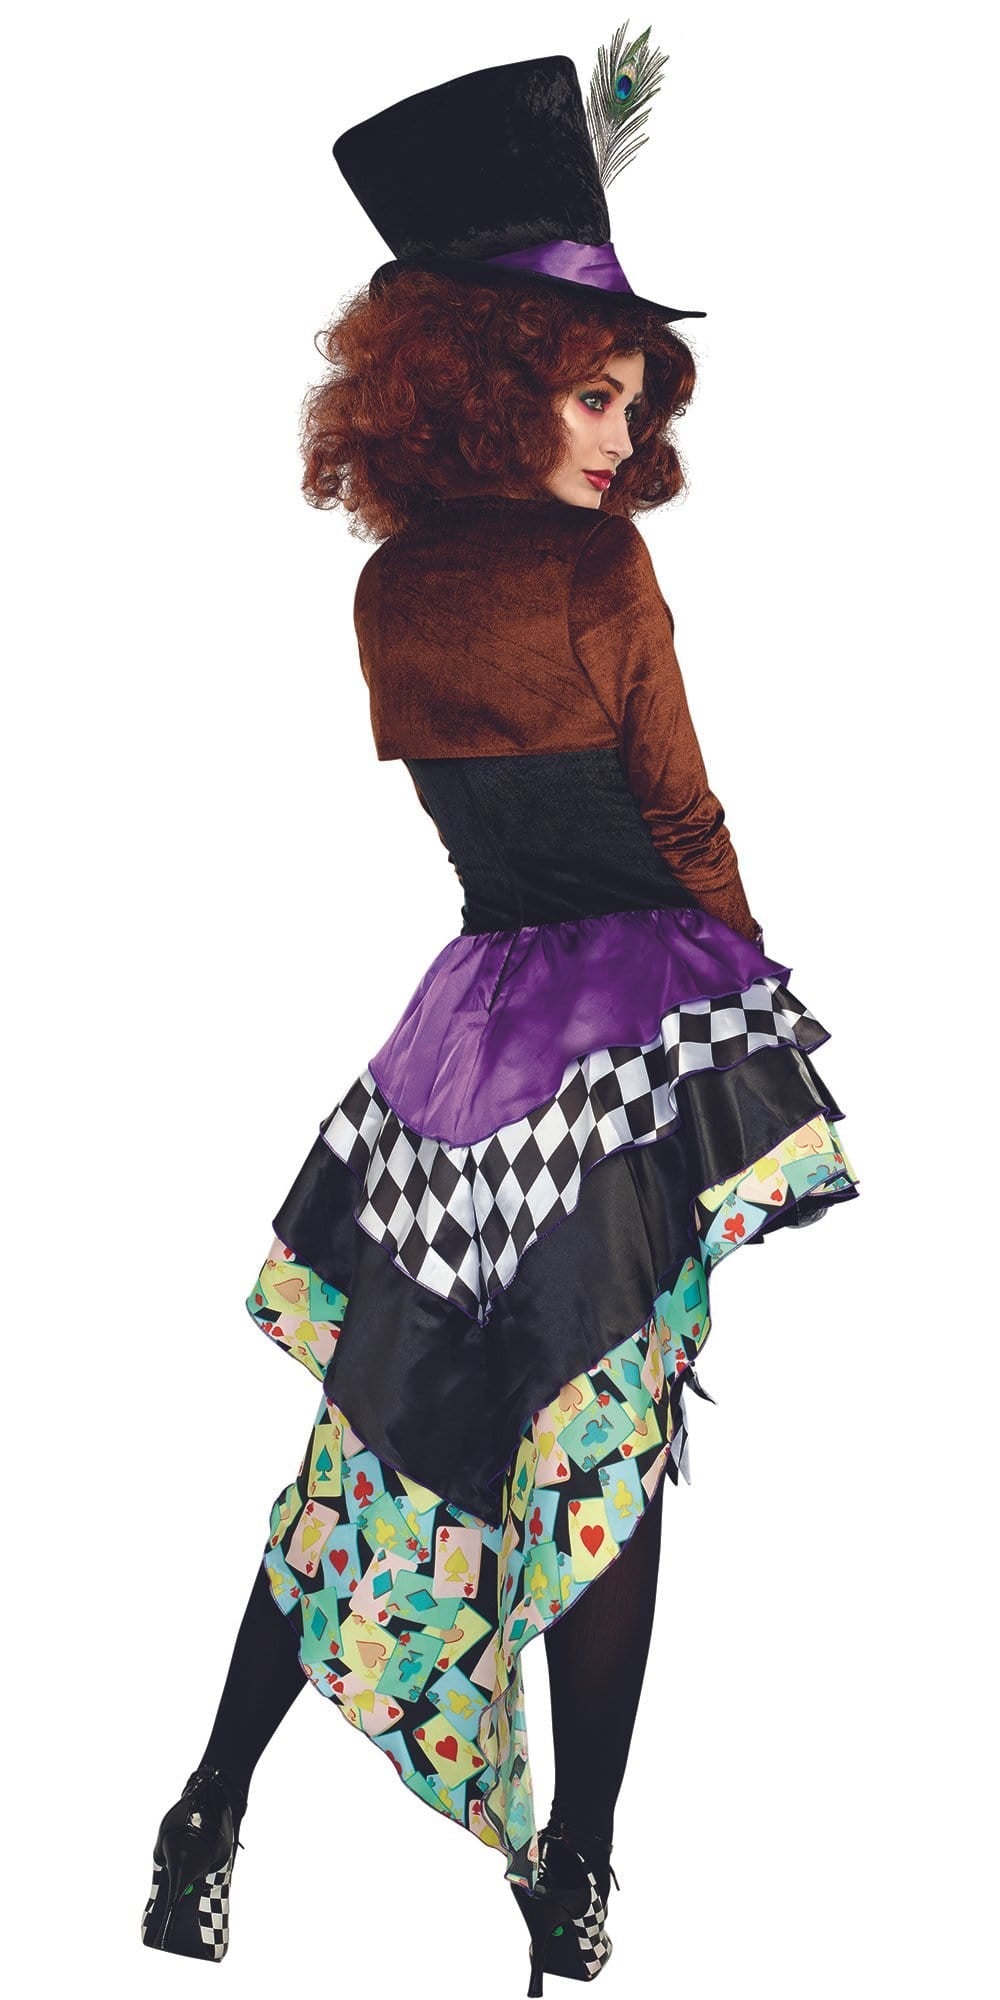 Sexy Whimsical Hatter Madness Storybook Women's Costume Musotica.com